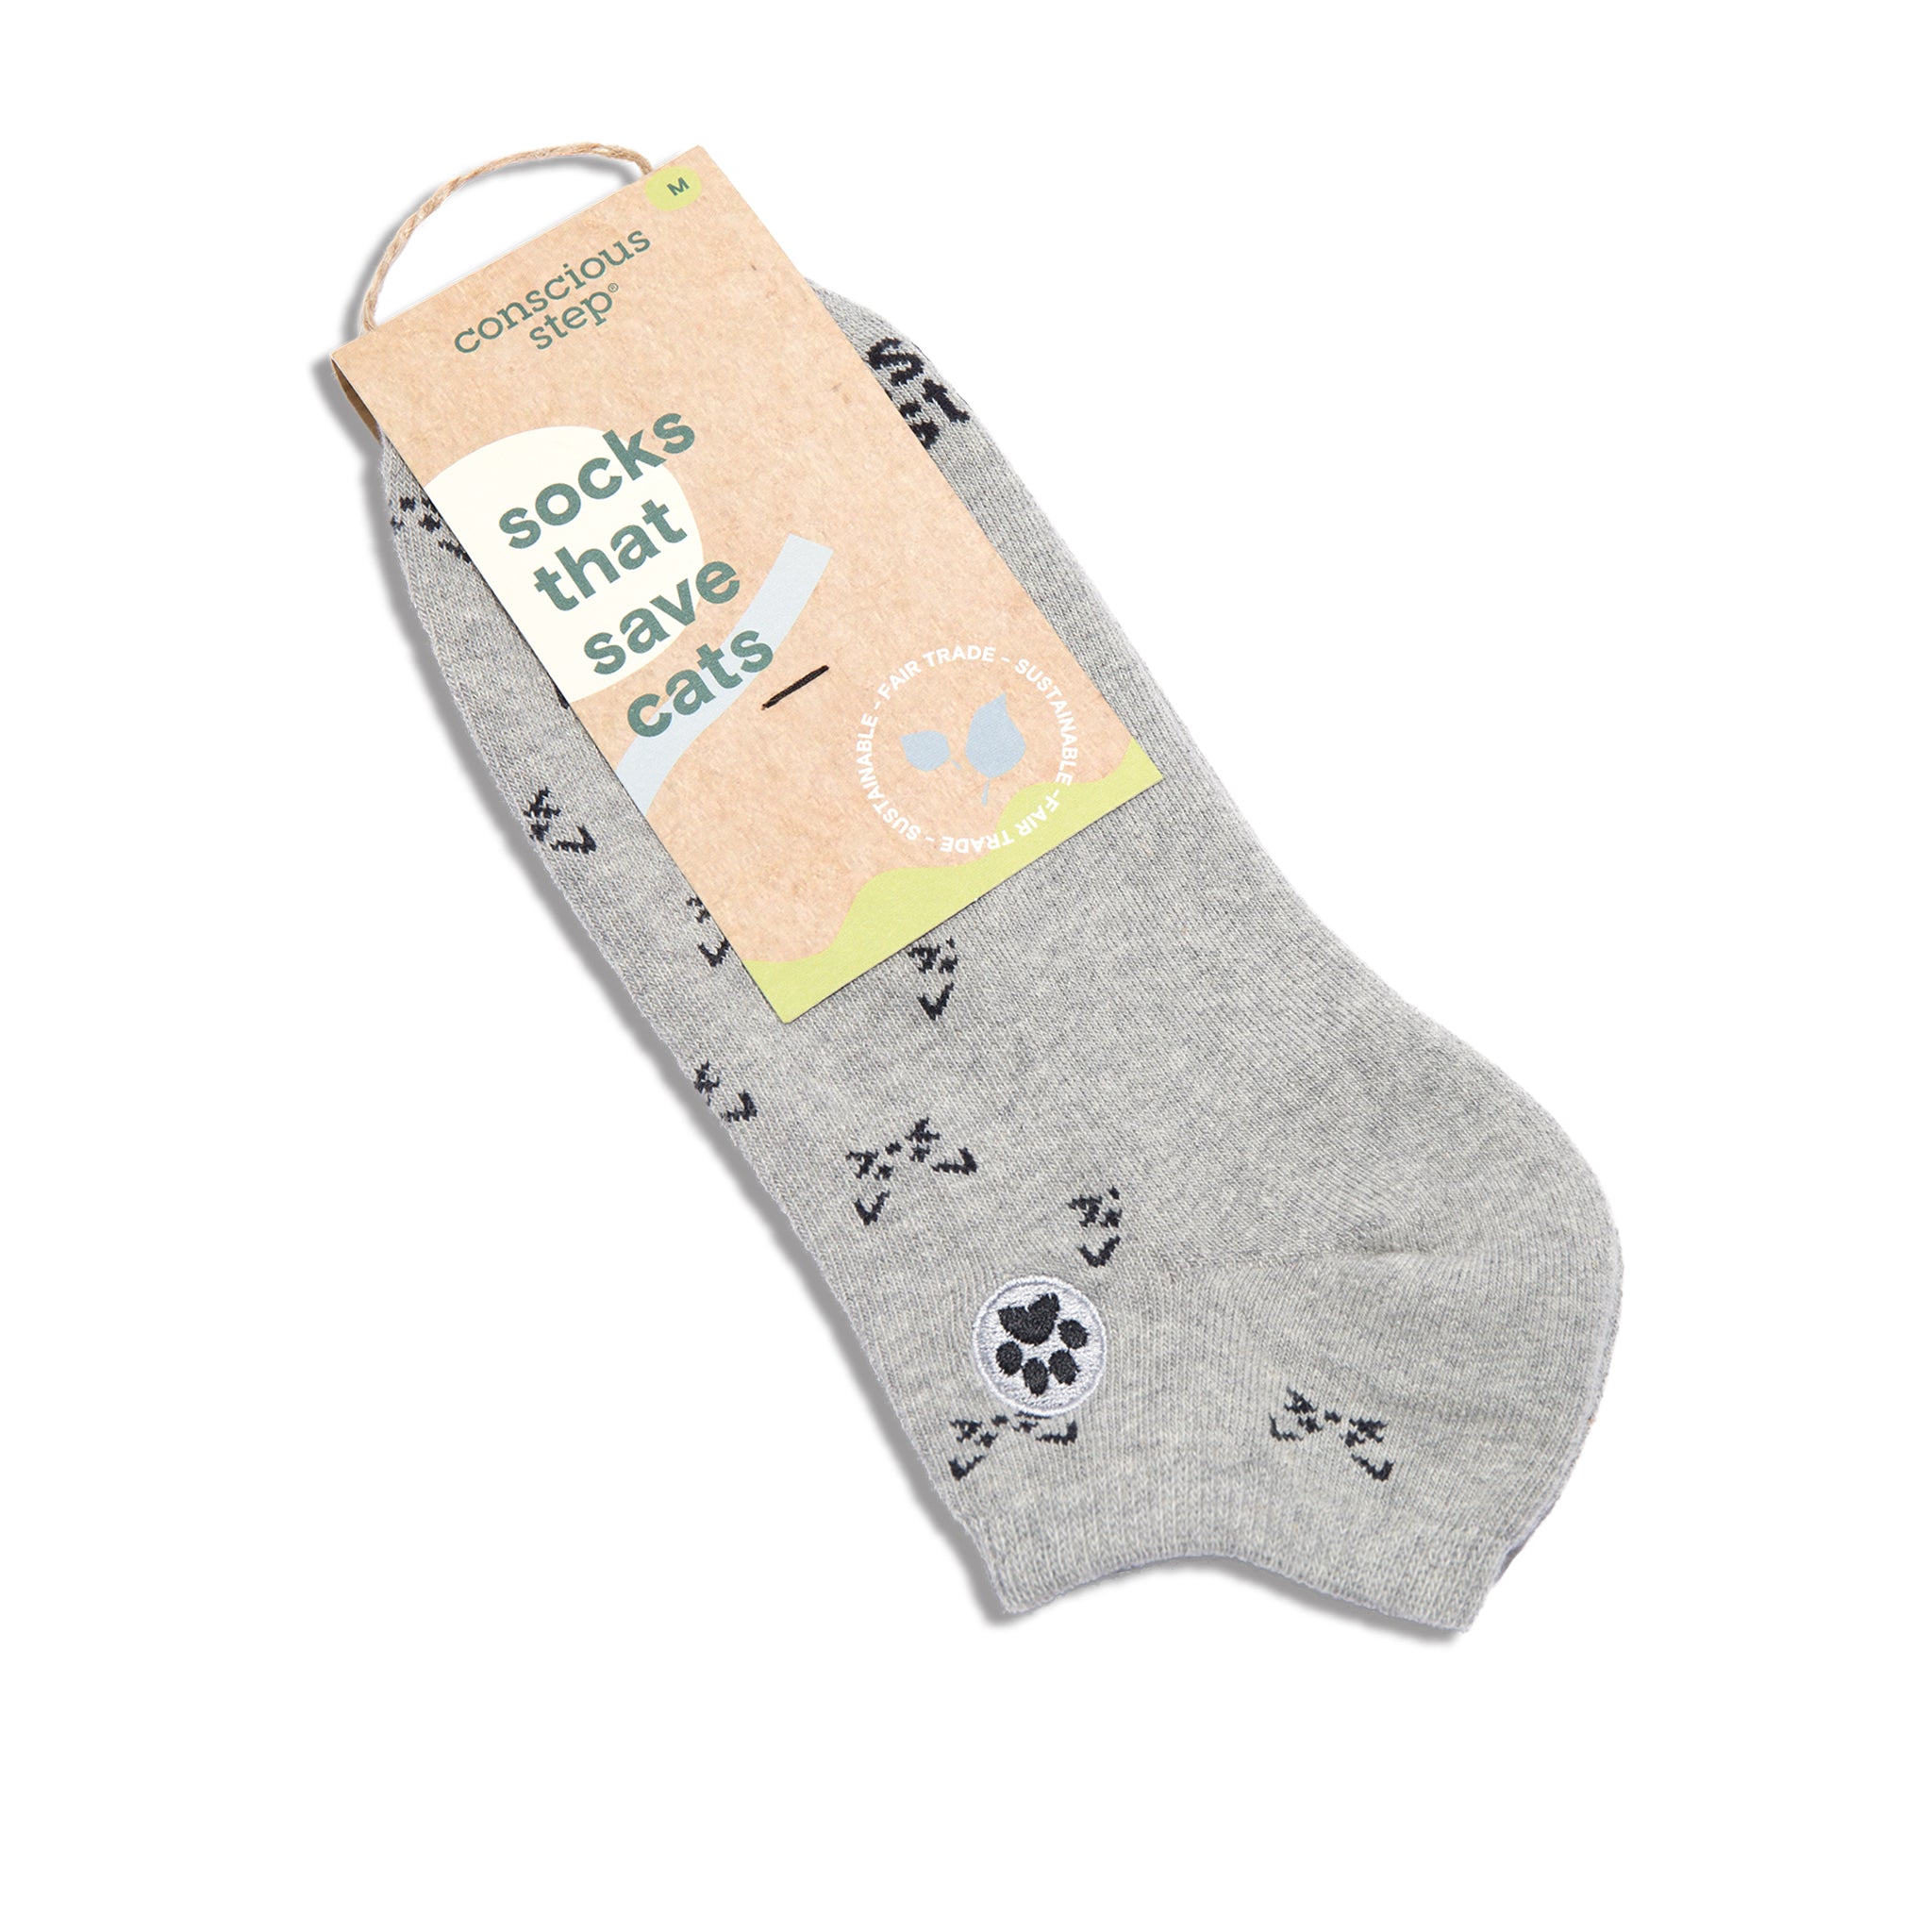 Conscious Step Socks that Save Dogs & Cats | Sustainable Socks for a Cause